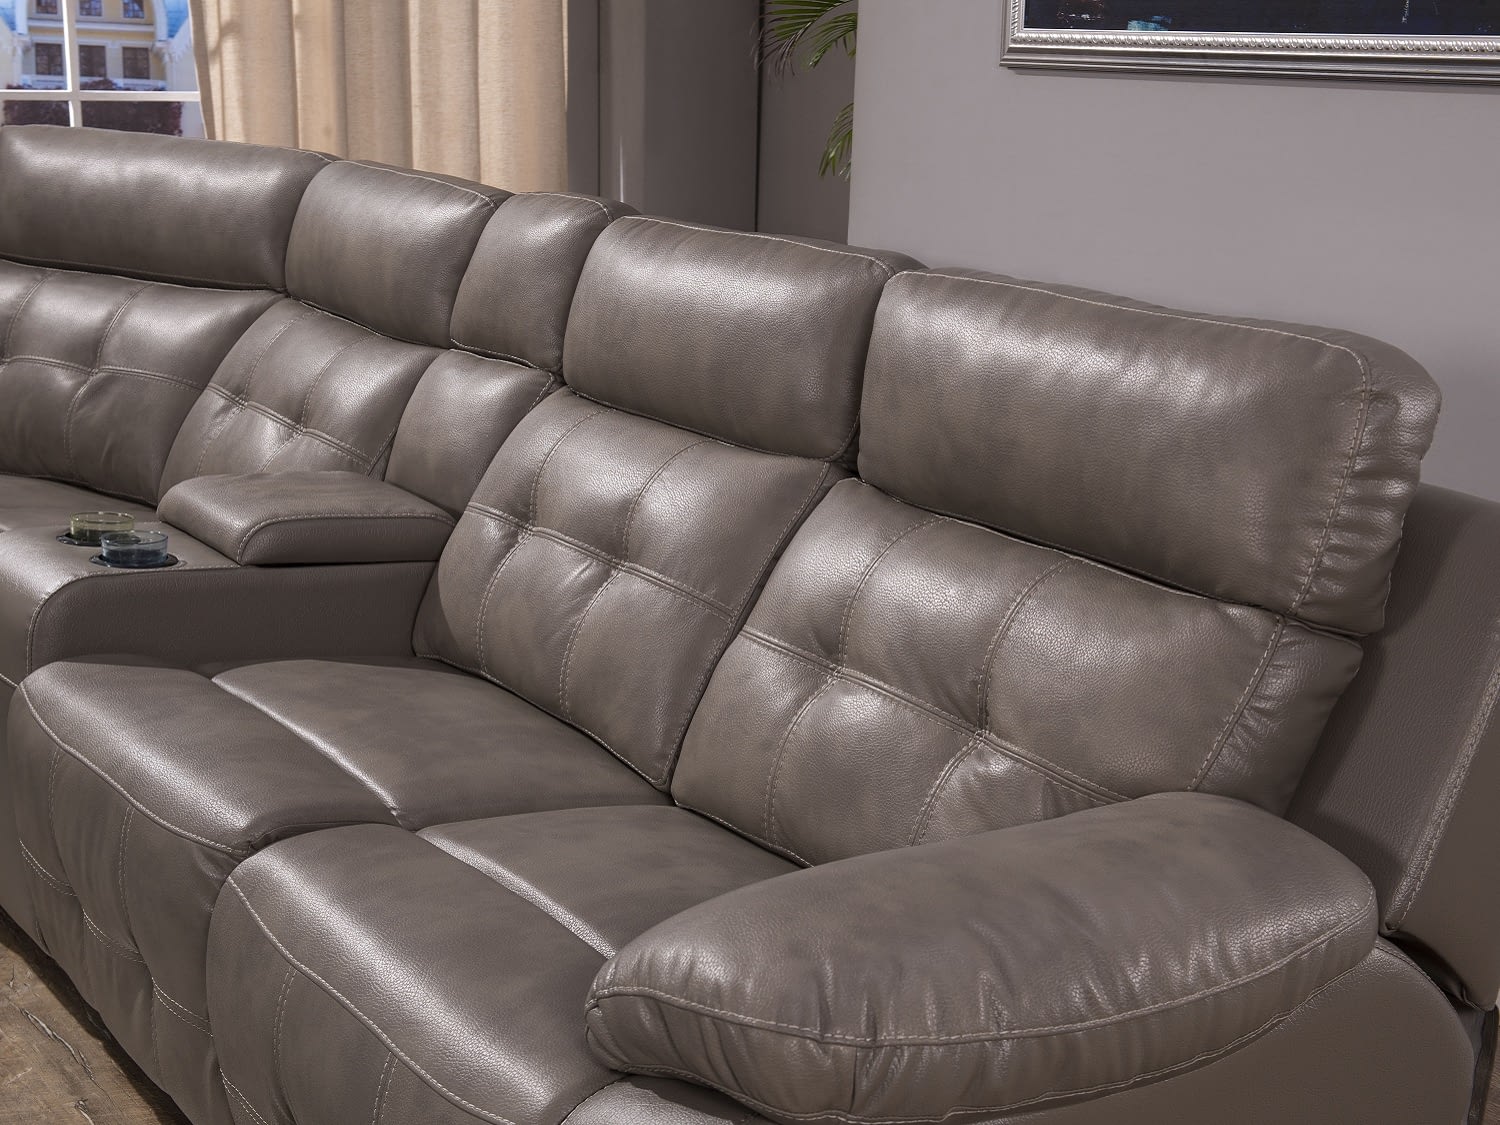 MOUNTOUR Leather Reclining Sectional - Seats